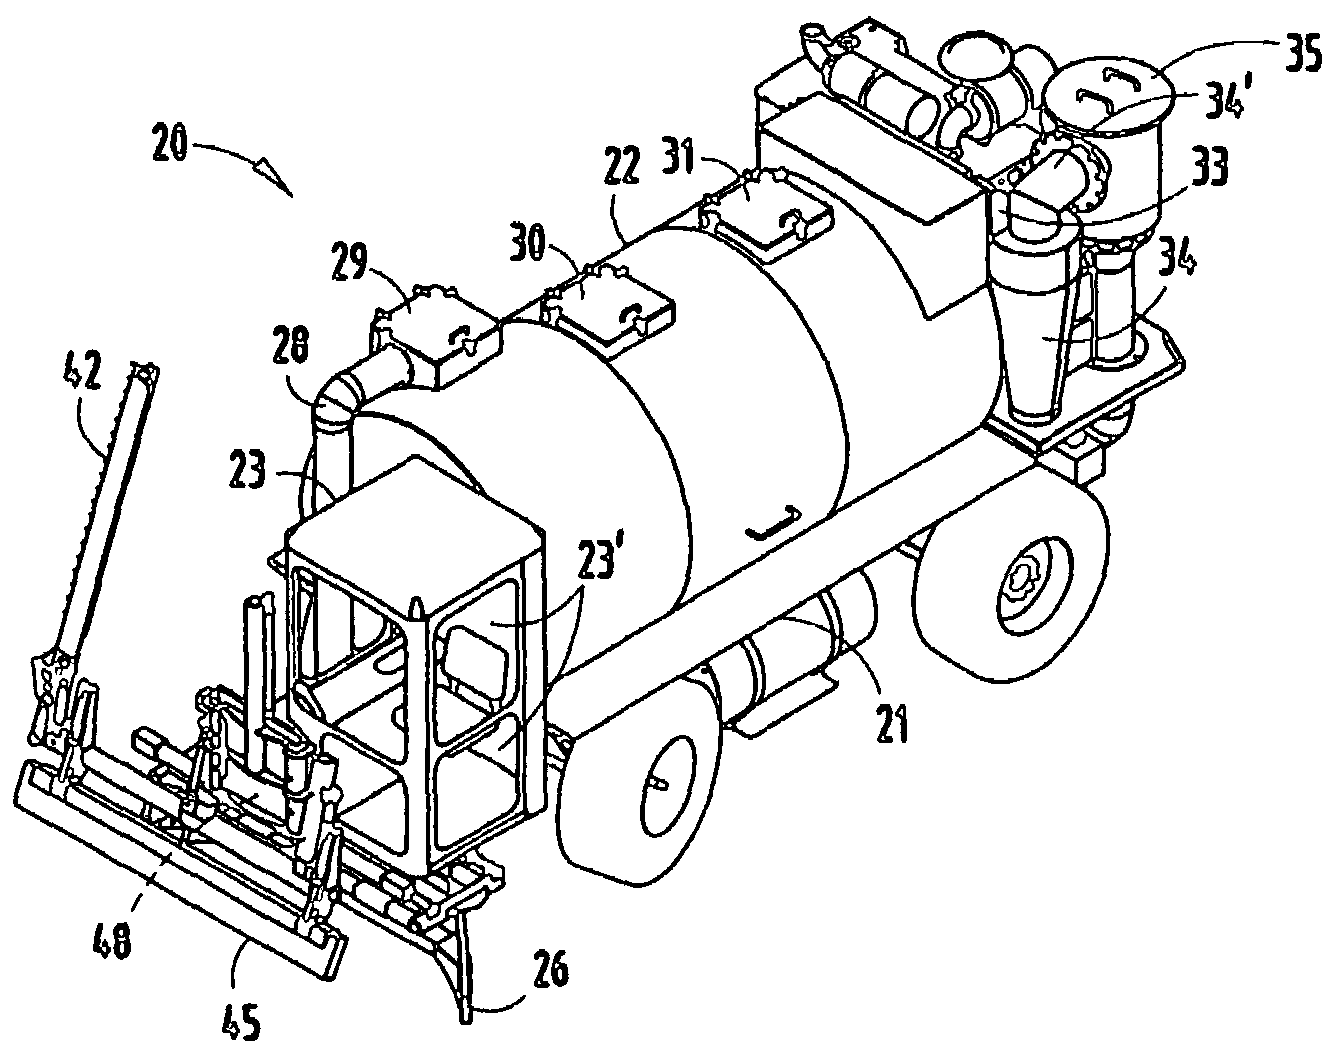 Stall and manure vacuum truck